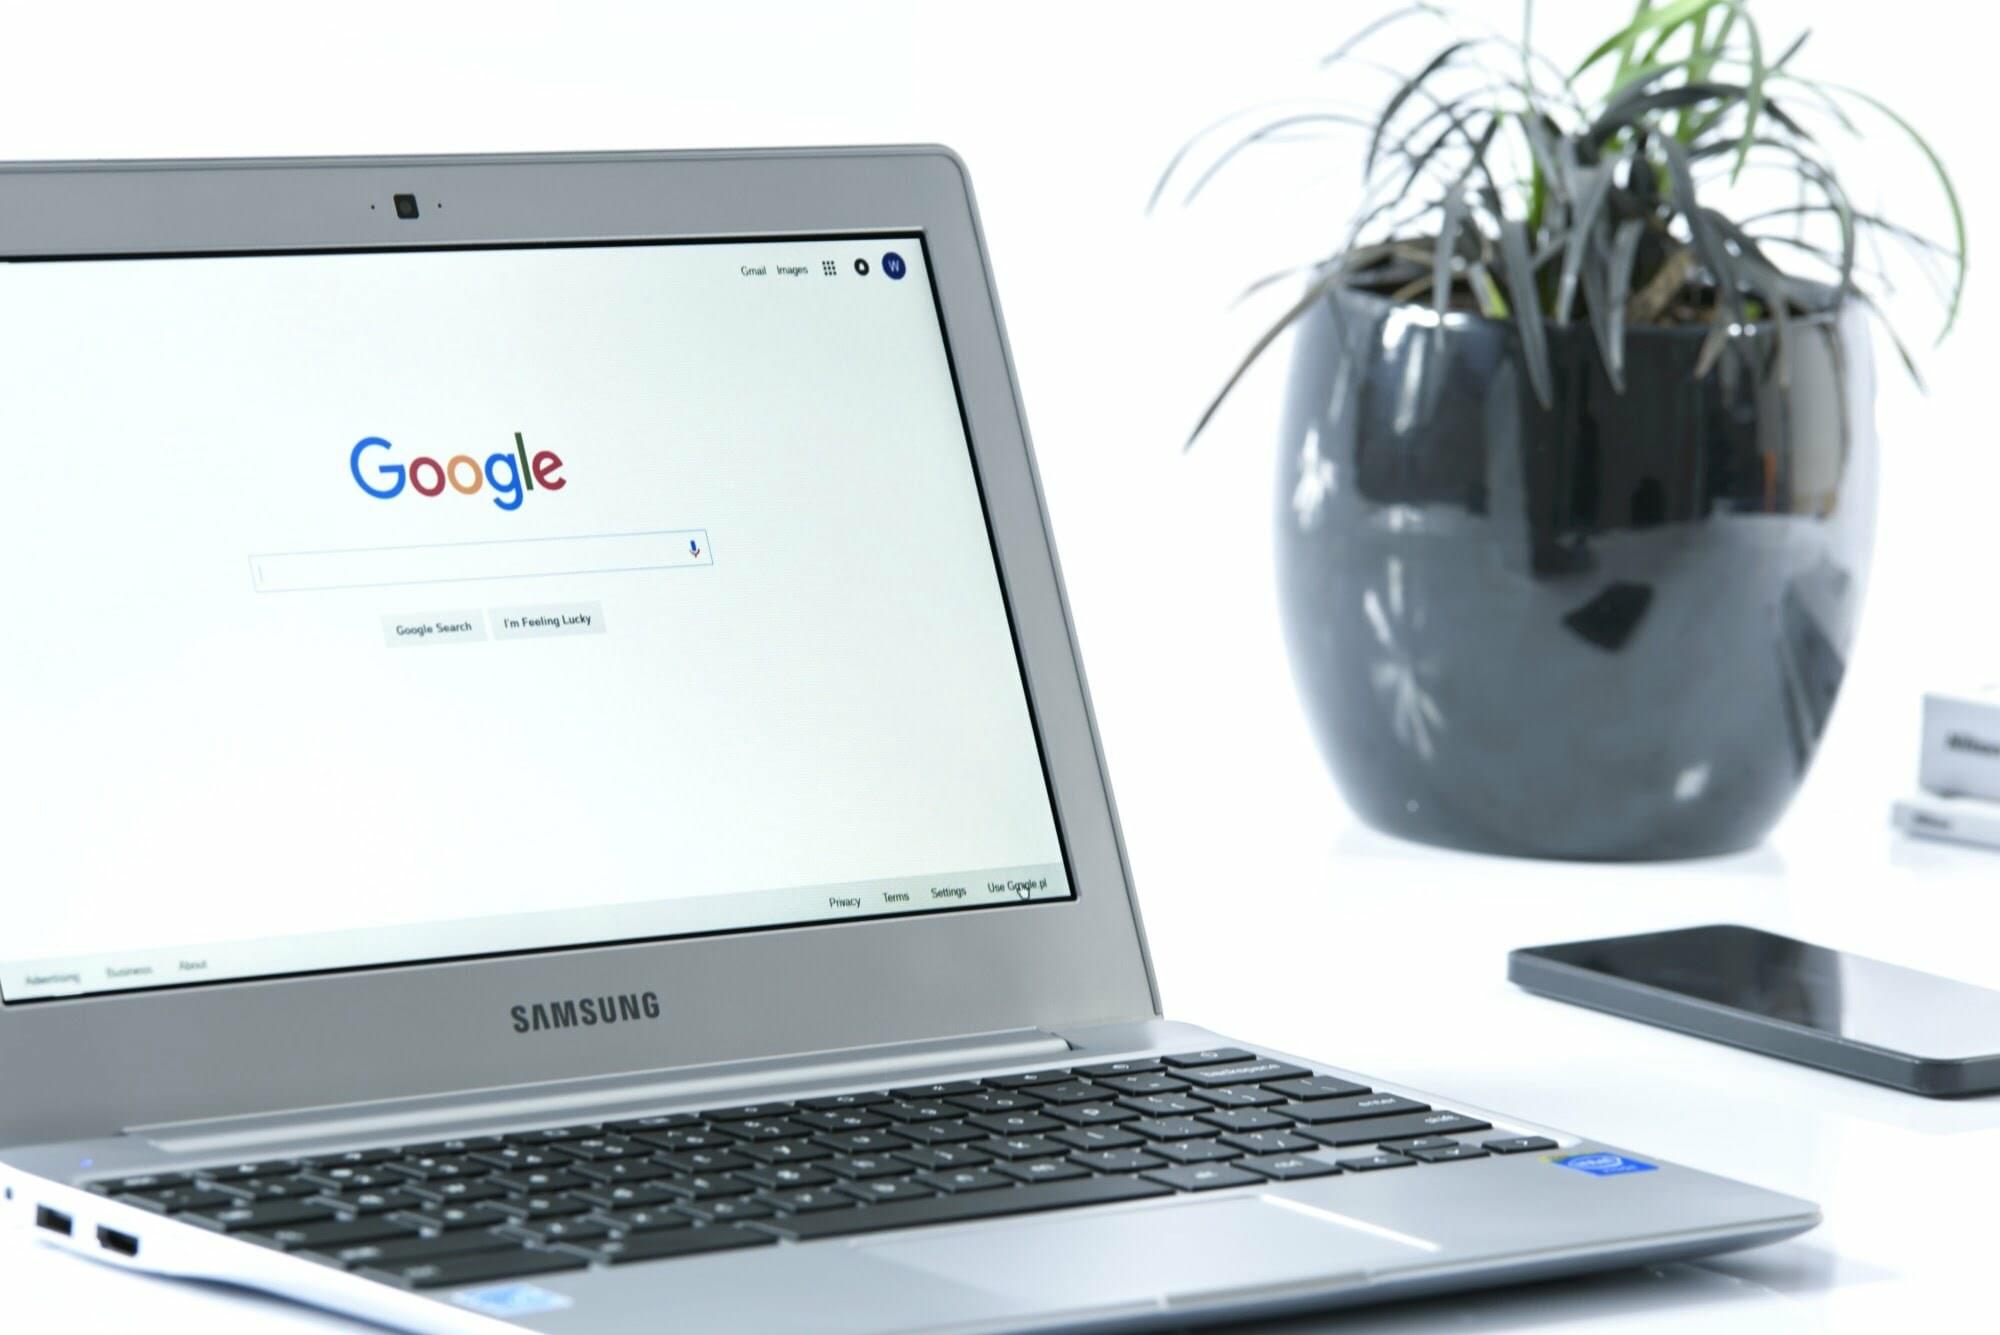 No. 15 -- The 10 Best Search Engine Positioning Strategies You Need in 2020